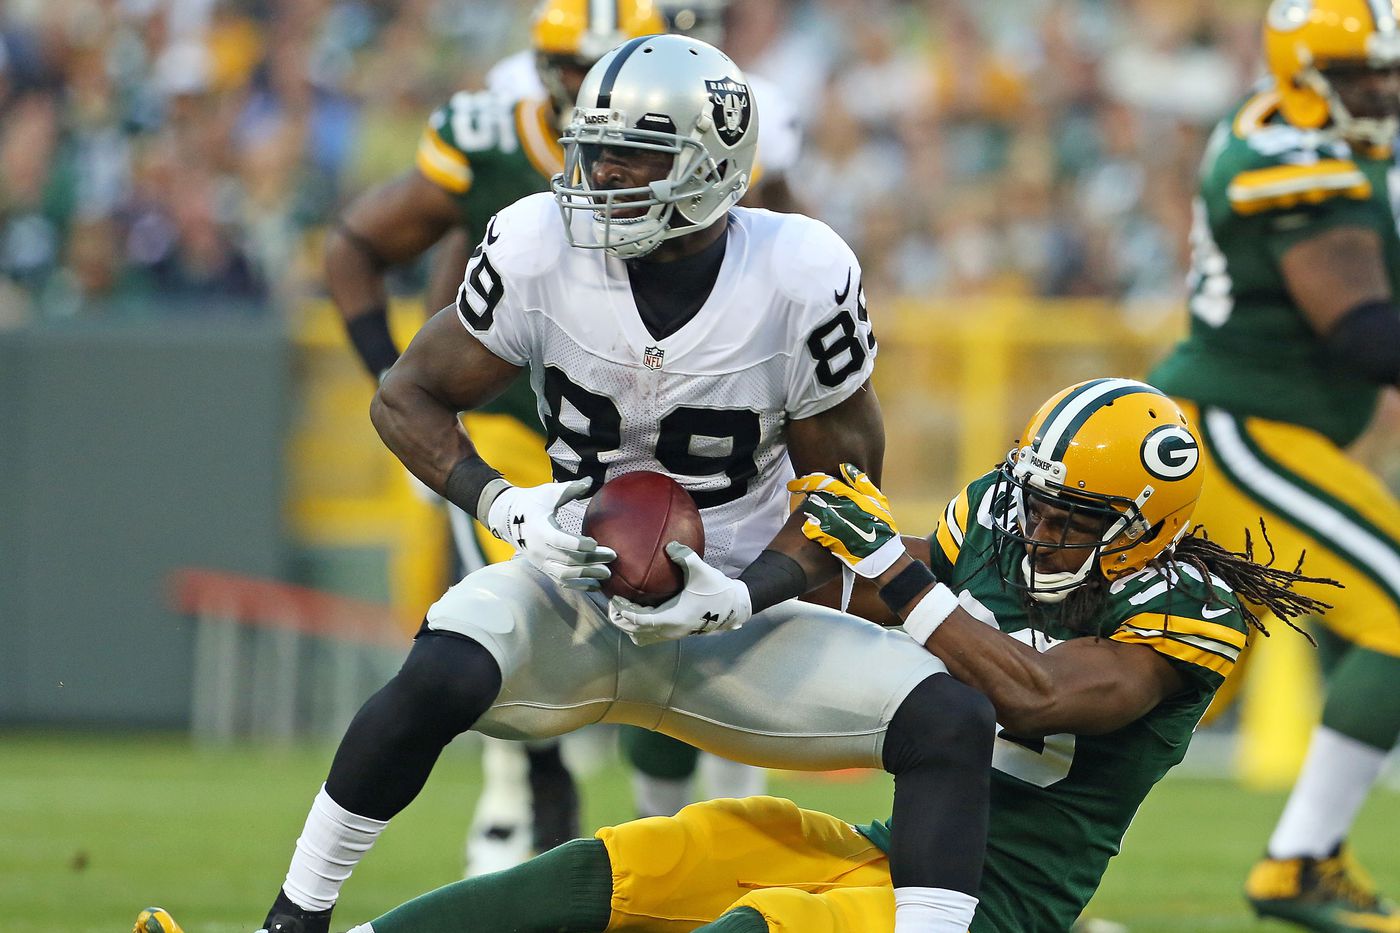 James Jones left Green Bay for Oakland for one year, but was back the following season.